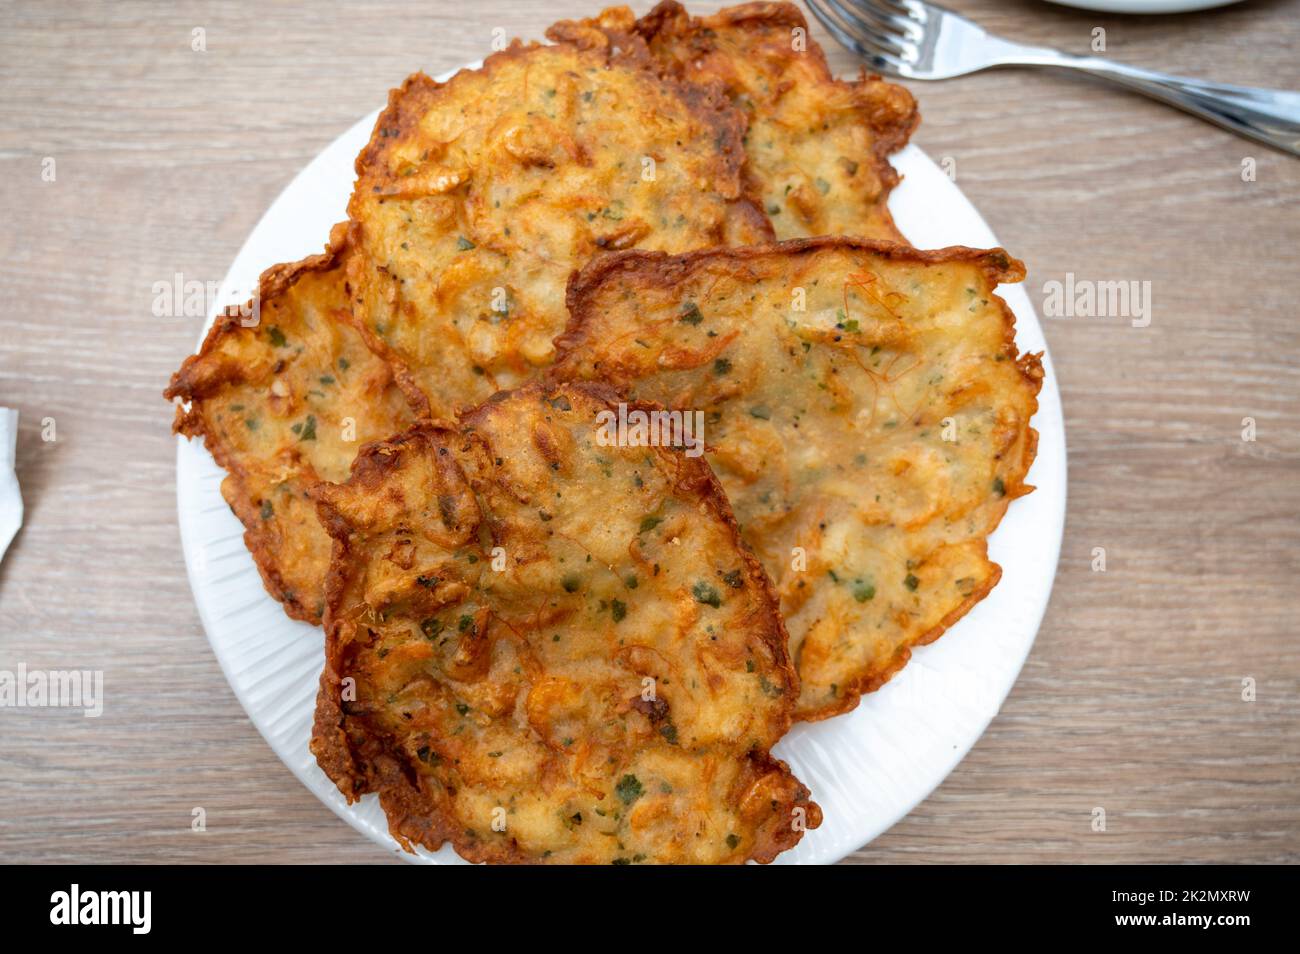 A plate of traditional prawn fritters in a restaurant in Spain Stock Photo